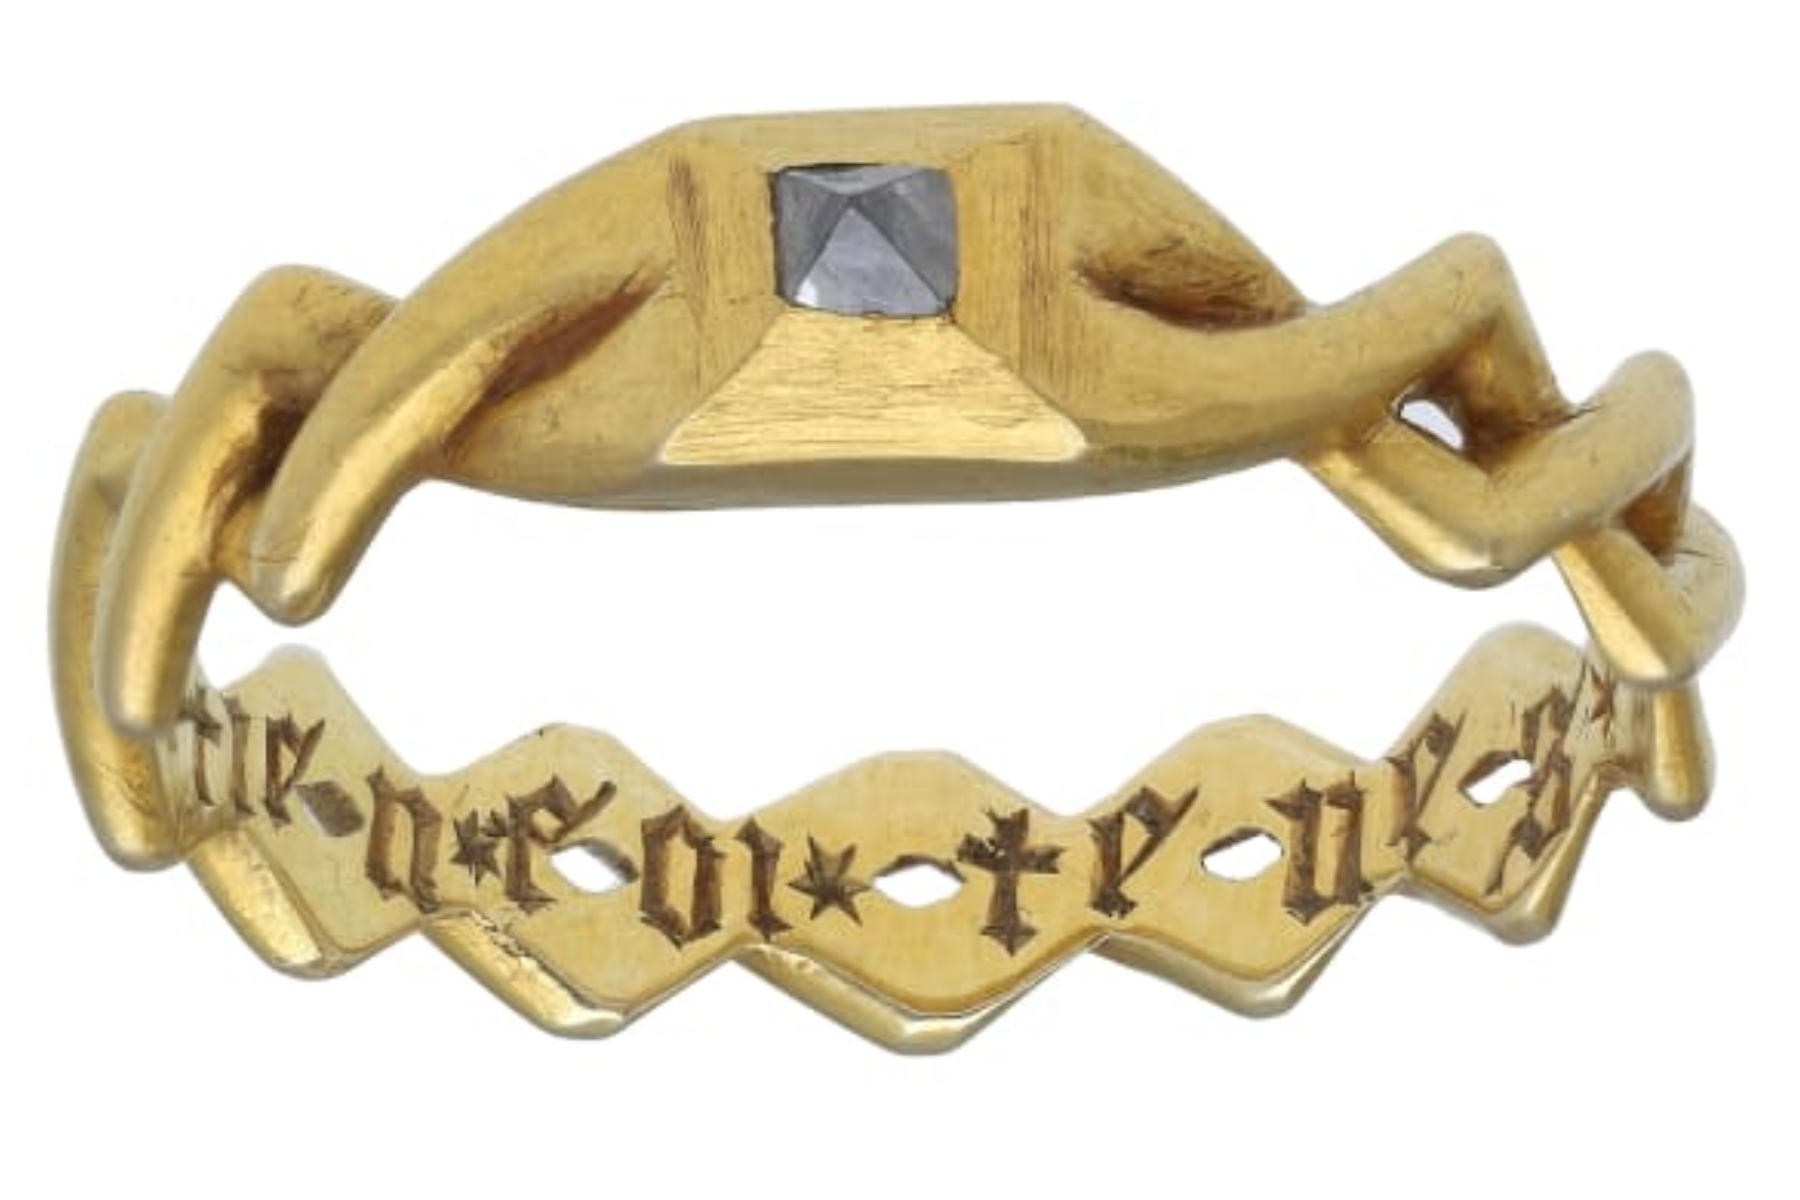 The ring interior inscription reads "I hold your faith, hold mine," in French